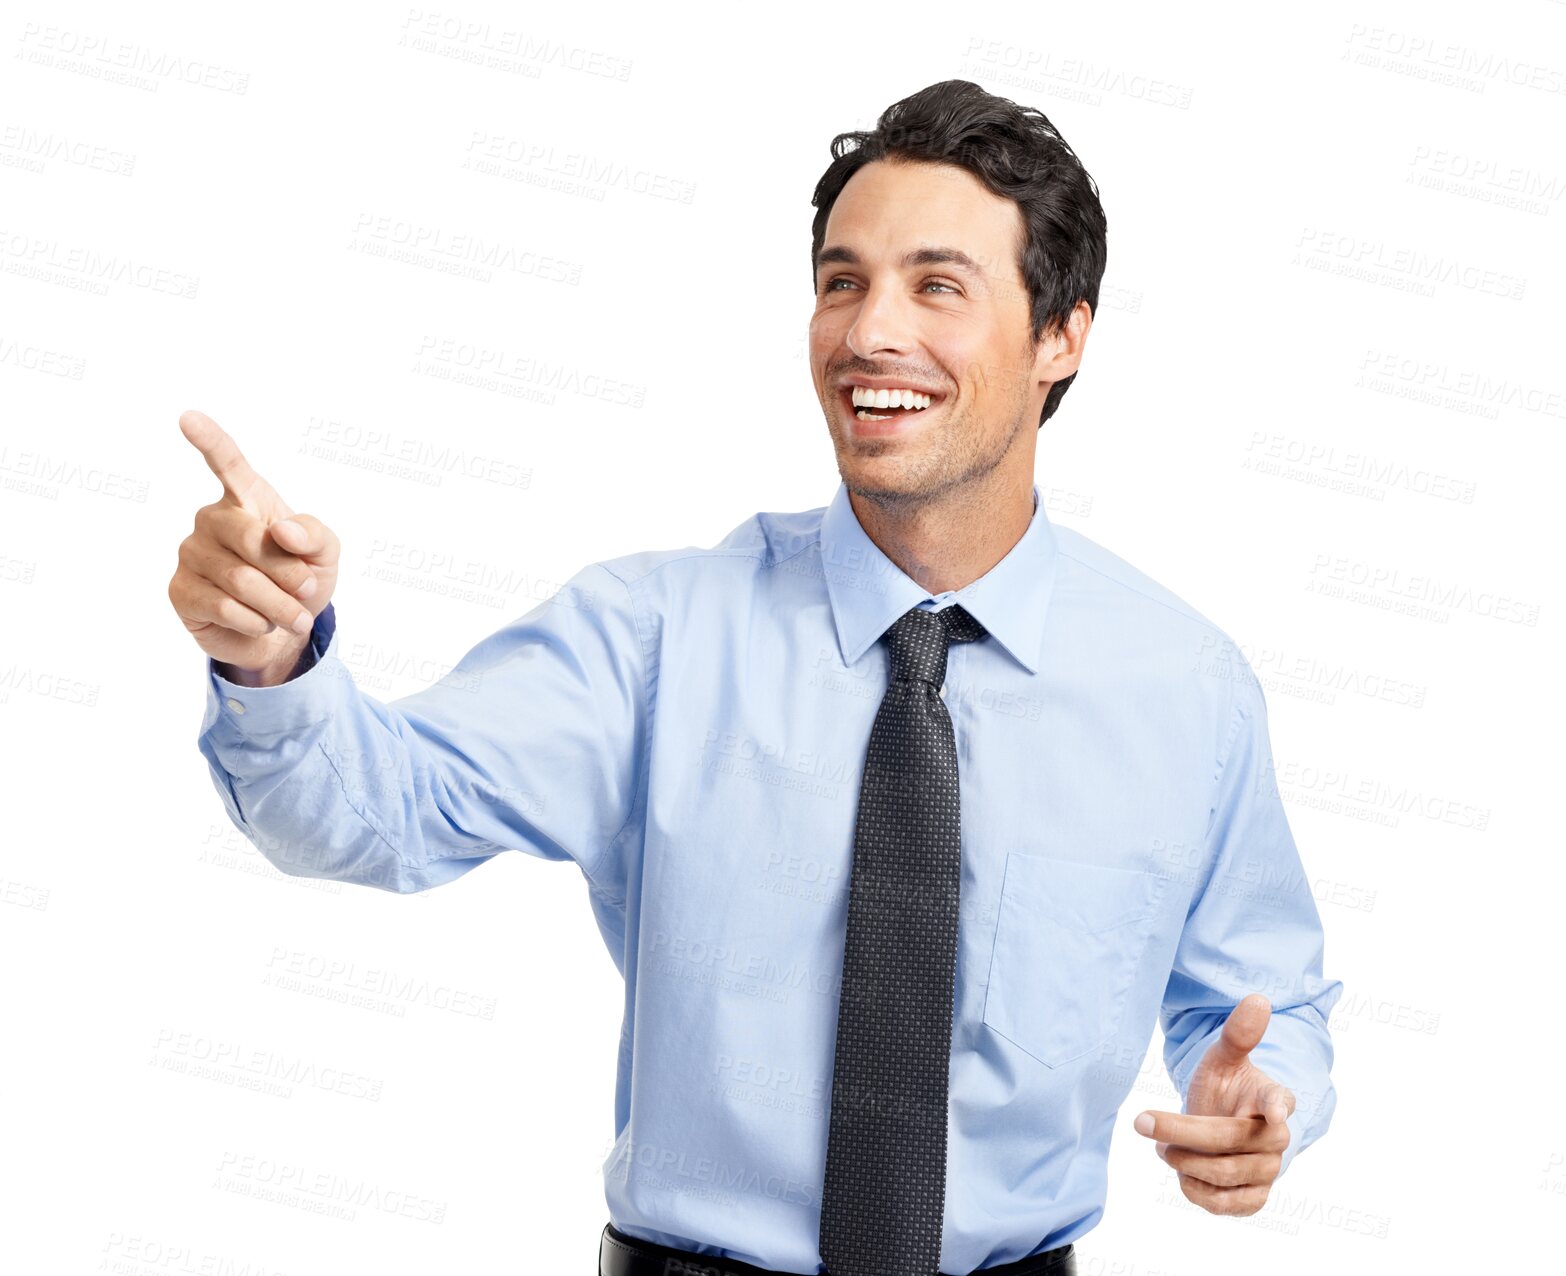 Buy stock photo Information, pointing and decision with a business man isolated on a transparent background to vote on an option. Hand, happy or smile with a male employee on PNG for the presentation of a product